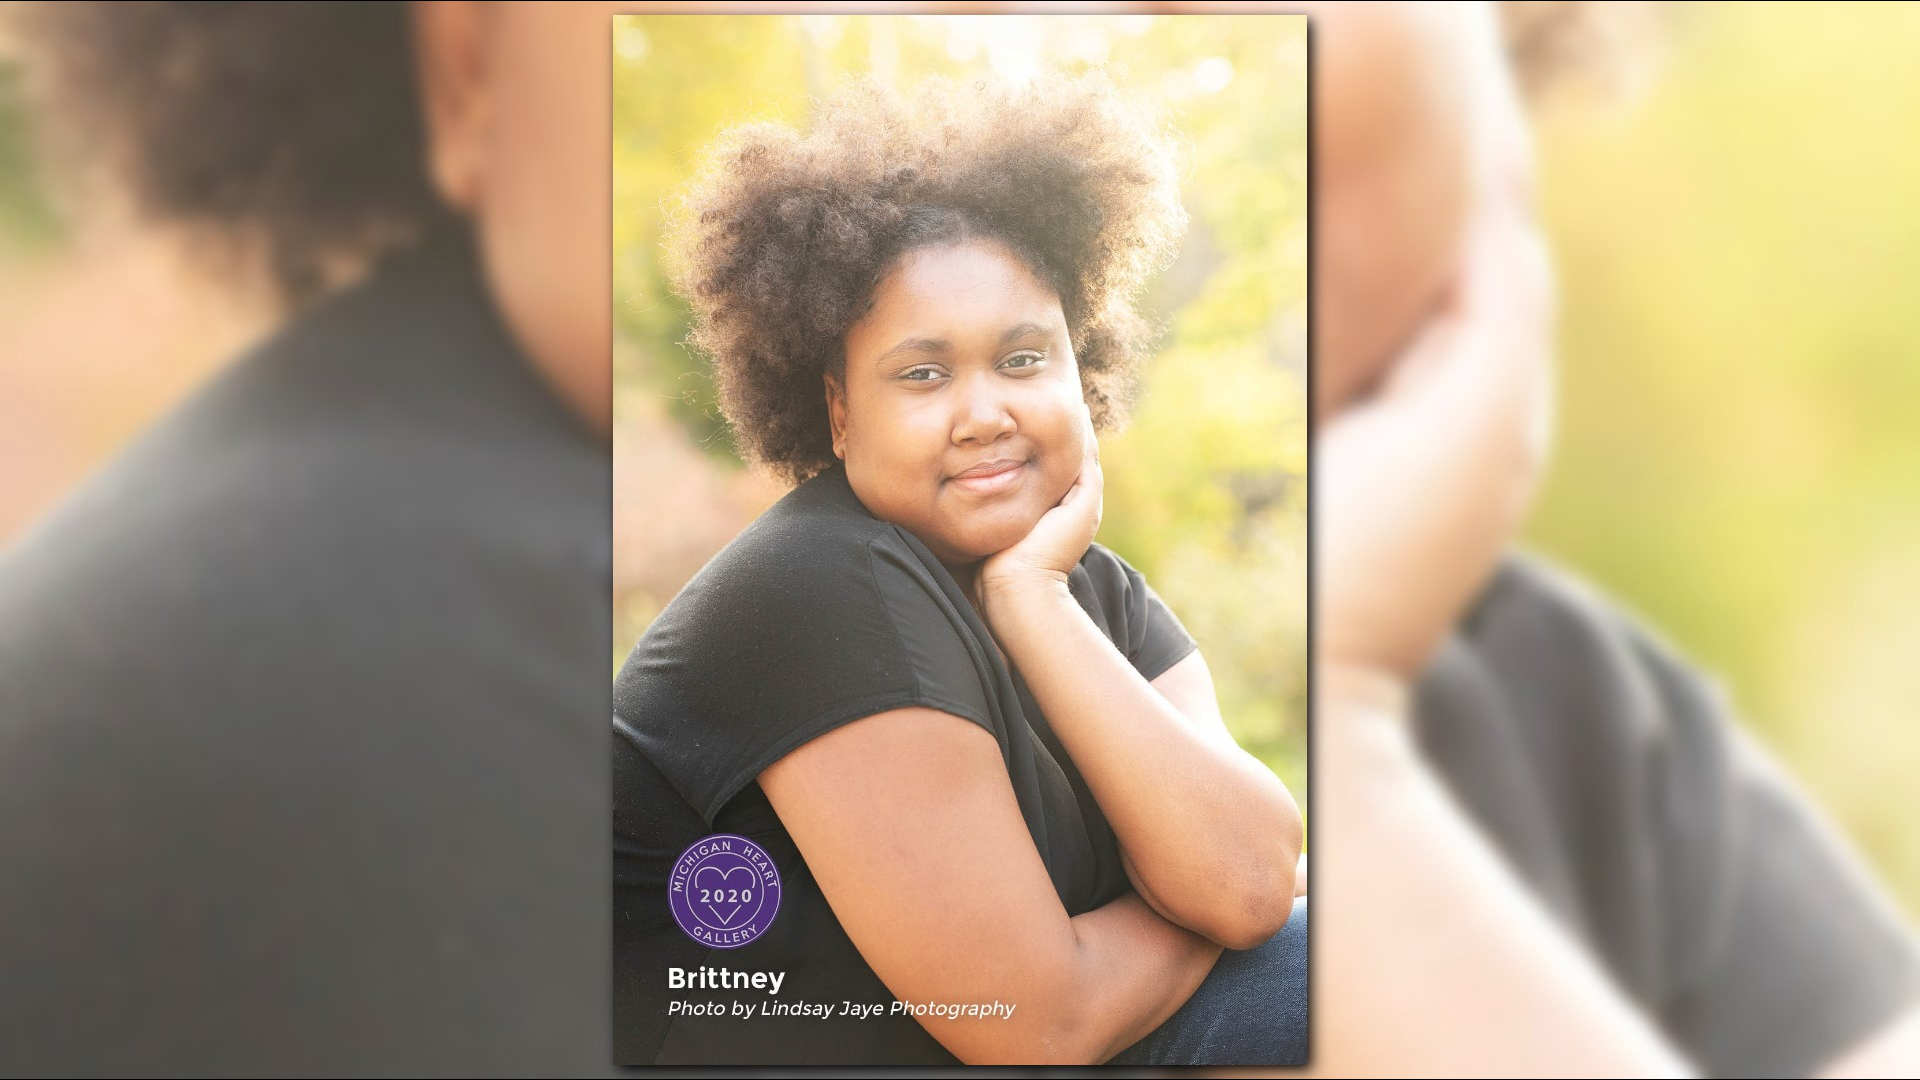 Meet 16-Year-Old Brittney, this week's Grant Me Hope child.